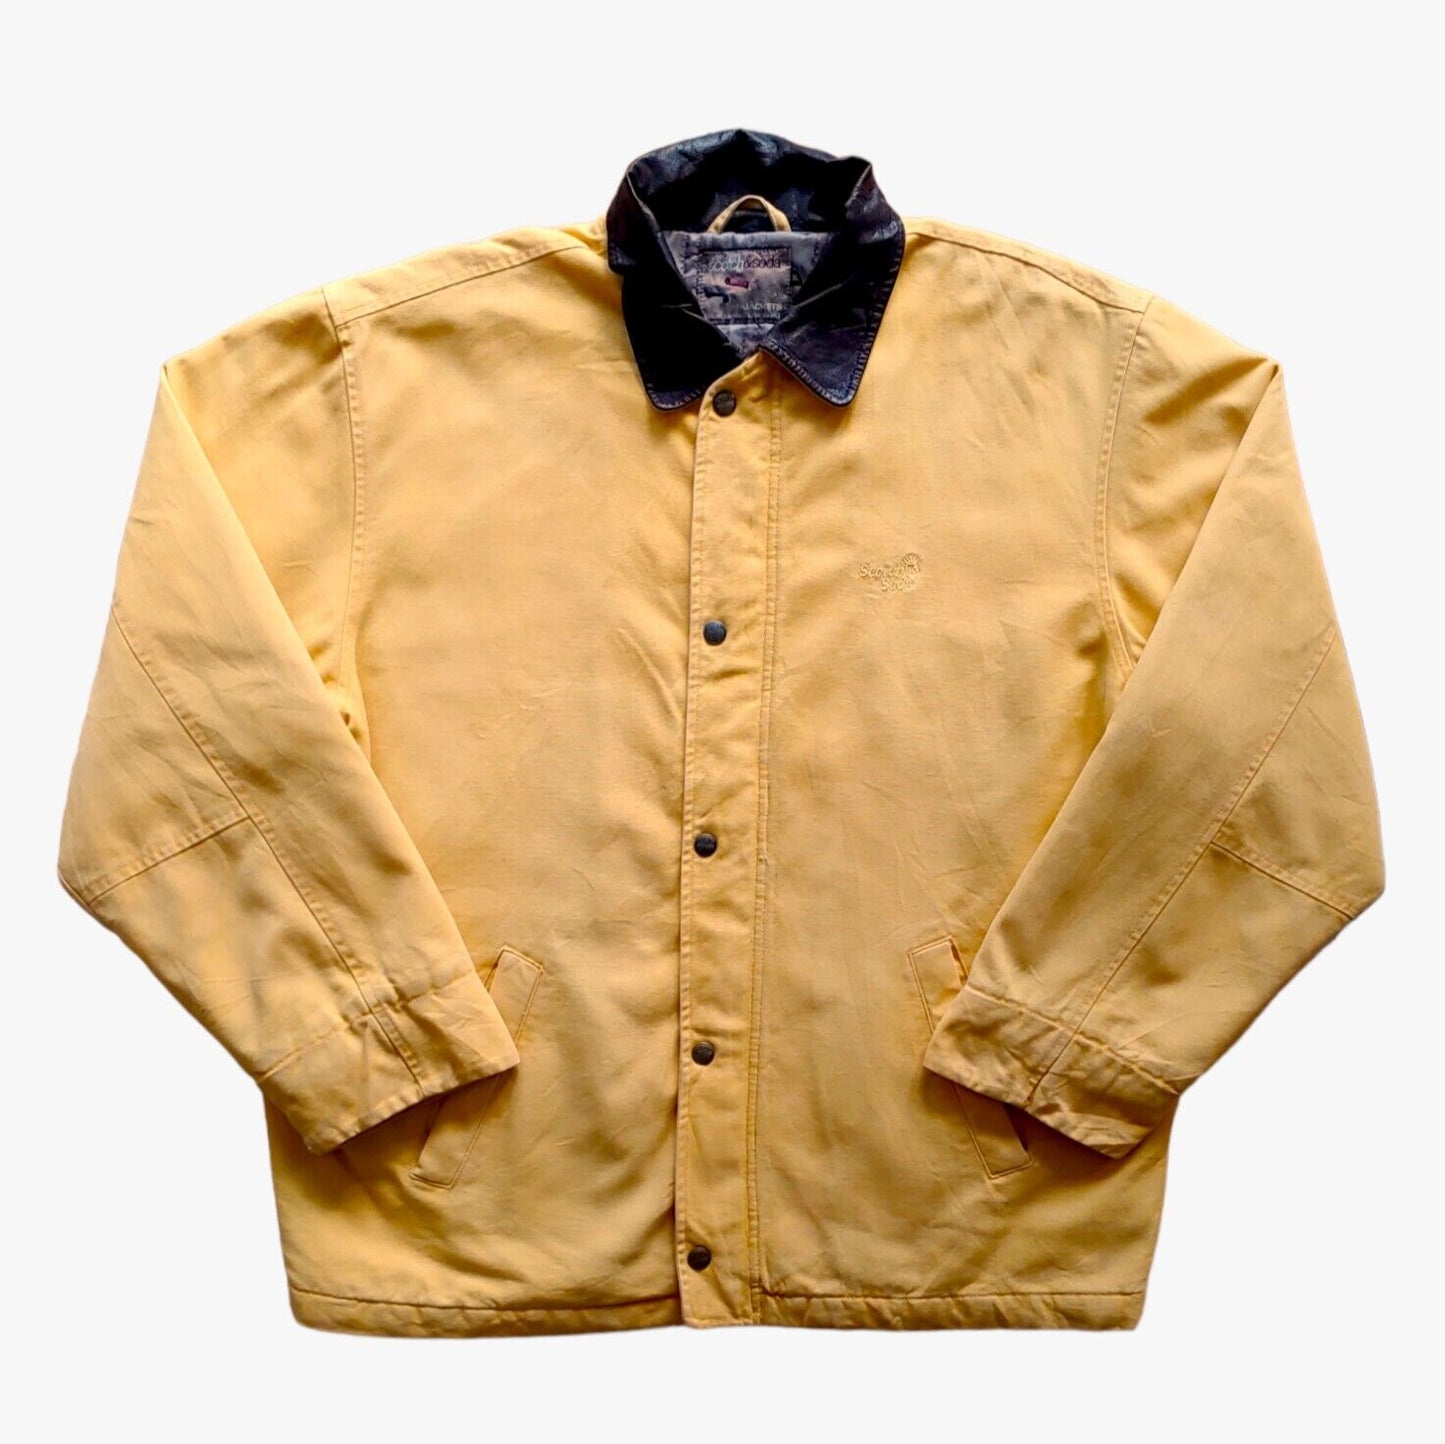 Vintage 1990s Scotch & Soda Yellow Thick Cotton Workwear Jacket With Leather Trim Collar - Casspios Dream